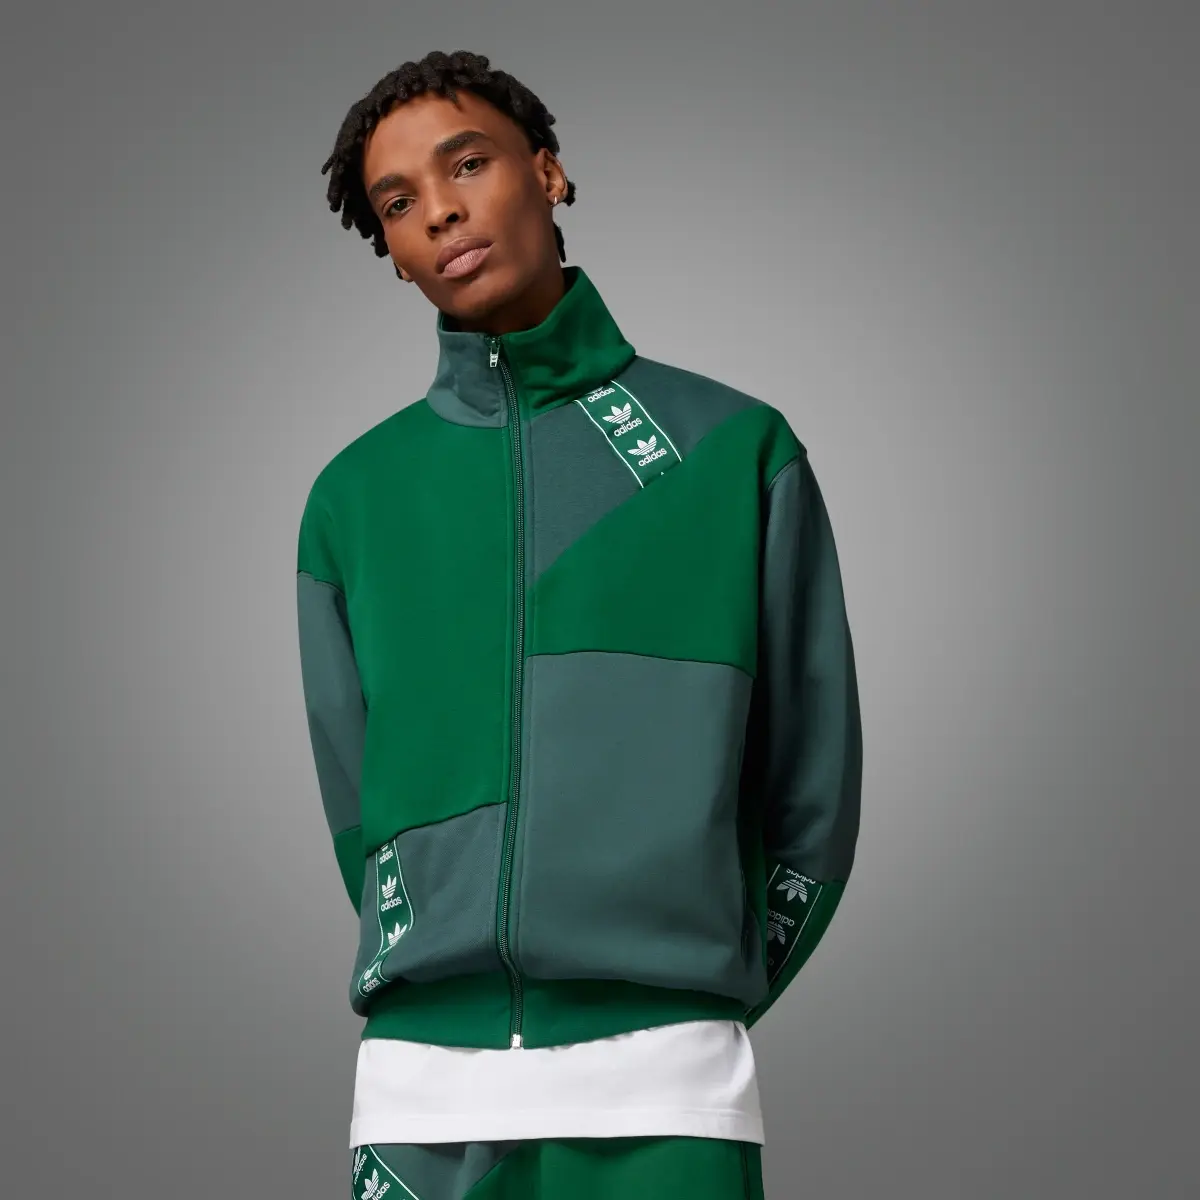 Adidas ADC Patchwork FB Track Top. 3